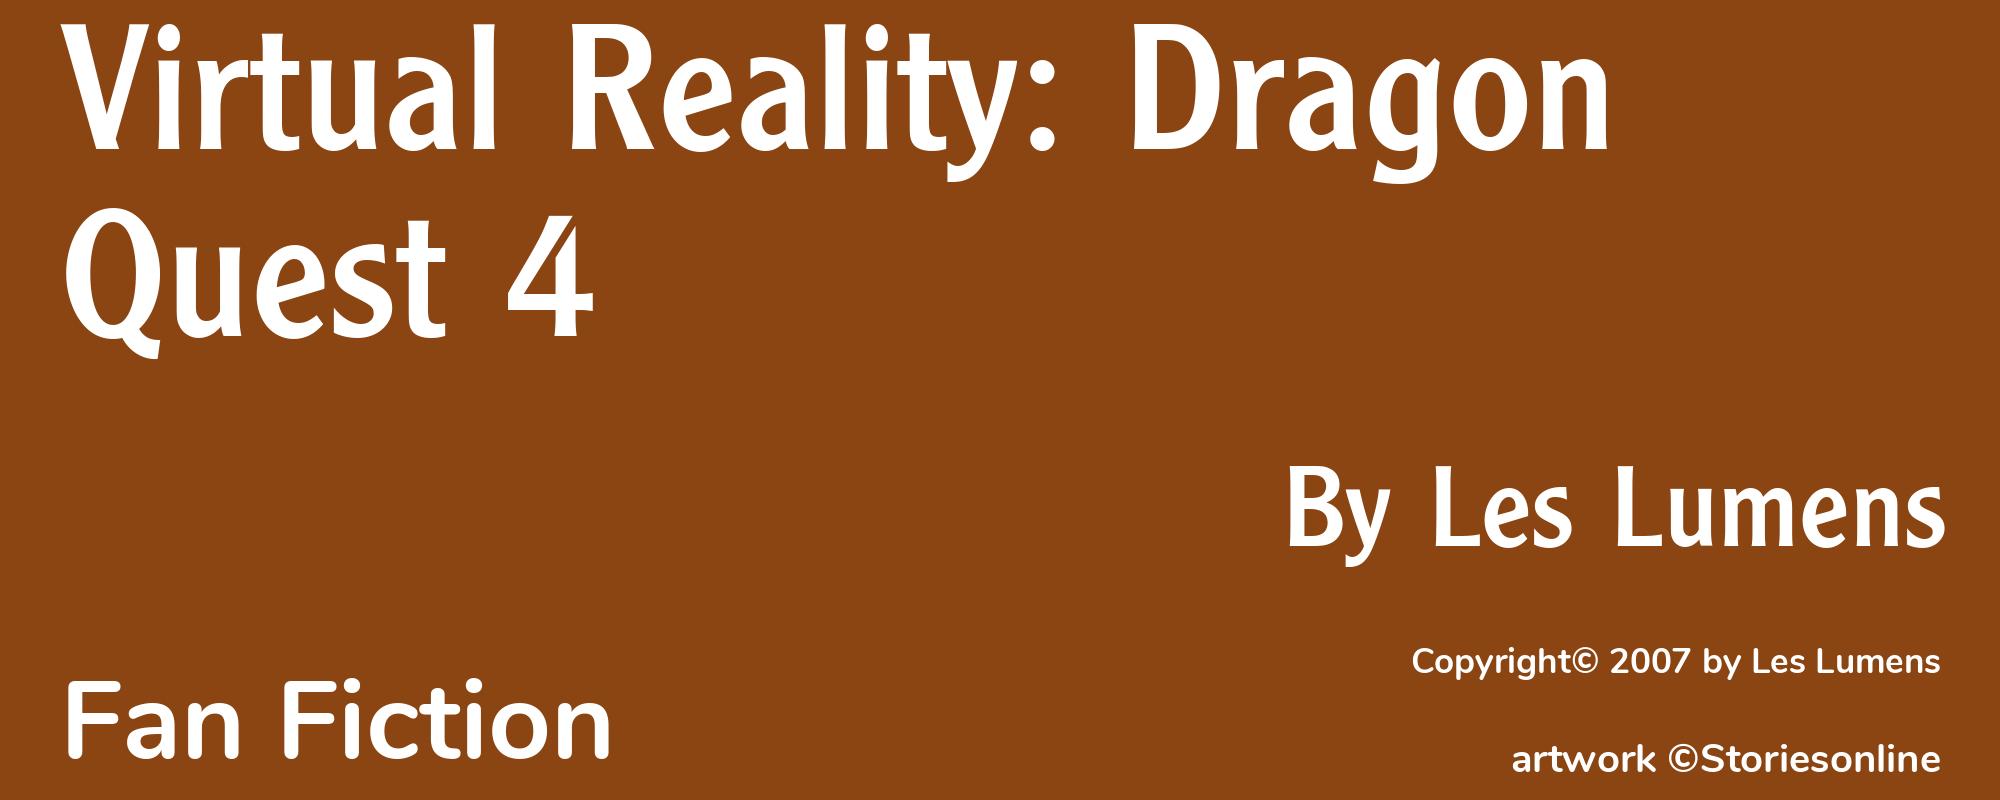 Virtual Reality: Dragon Quest 4 - Cover